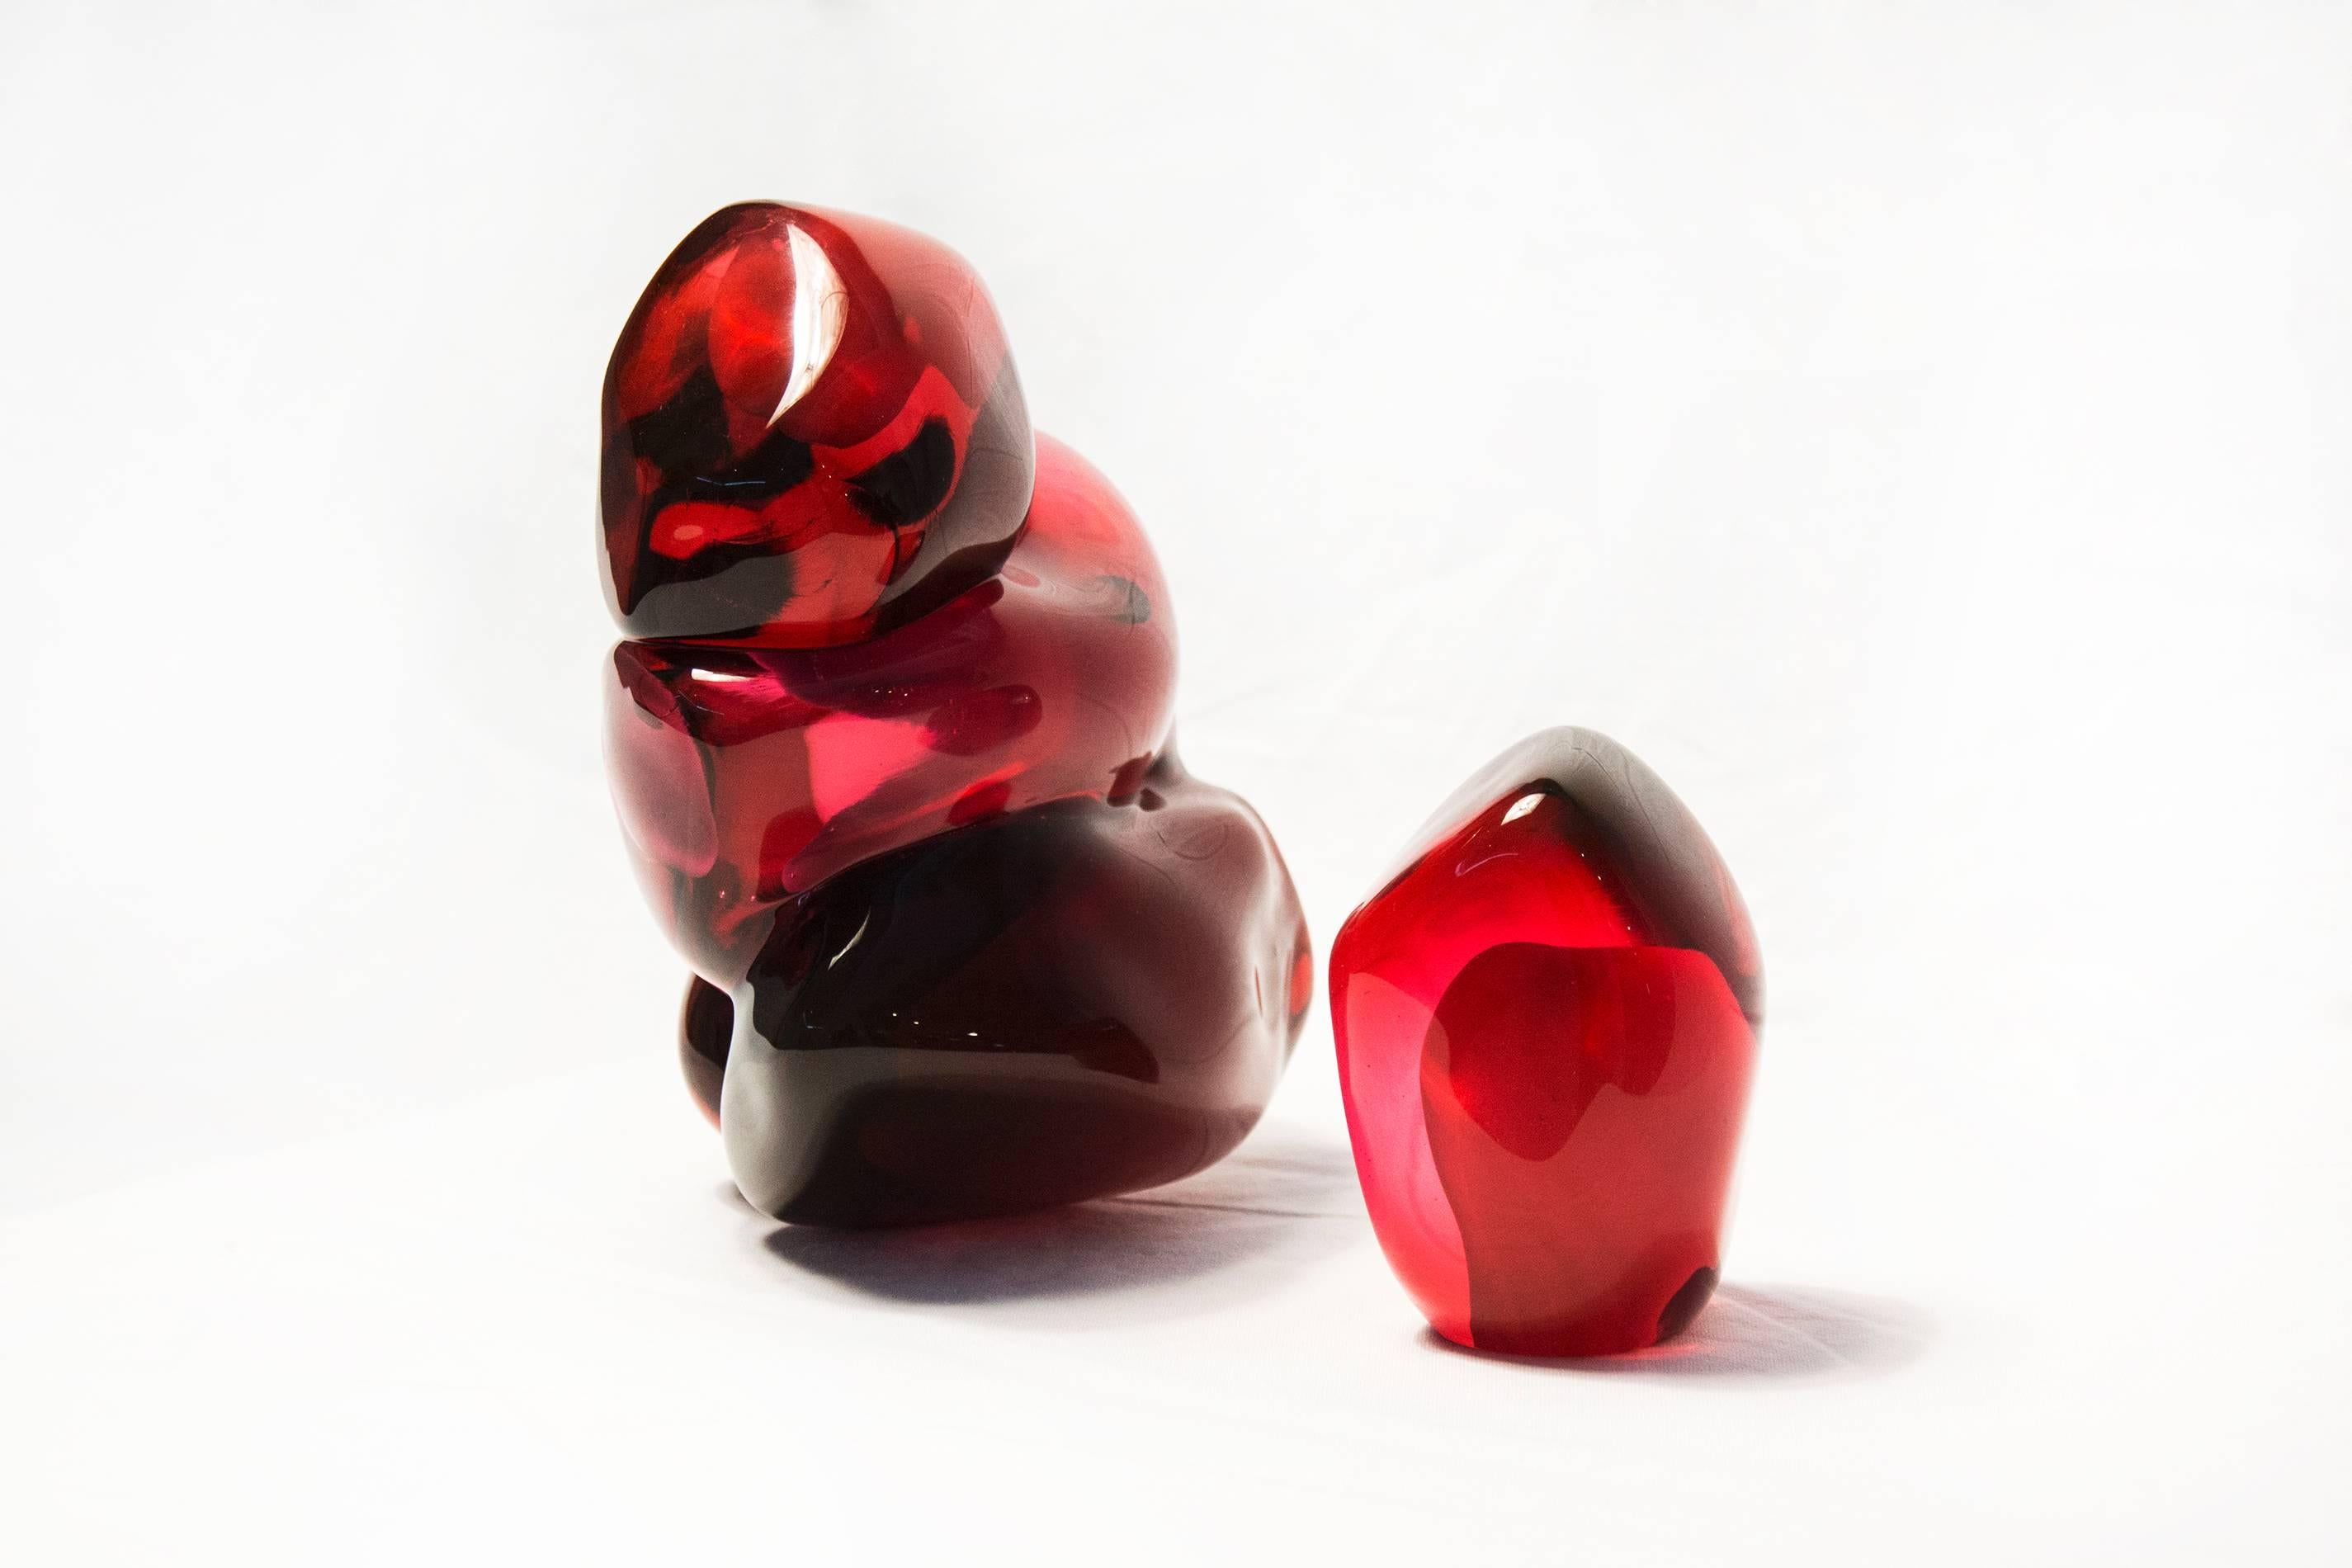 Four Pomegranate Seeds Plus One - small, bright, red, glass still life sculpture - Sculpture by Catherine Vamvakas Lay